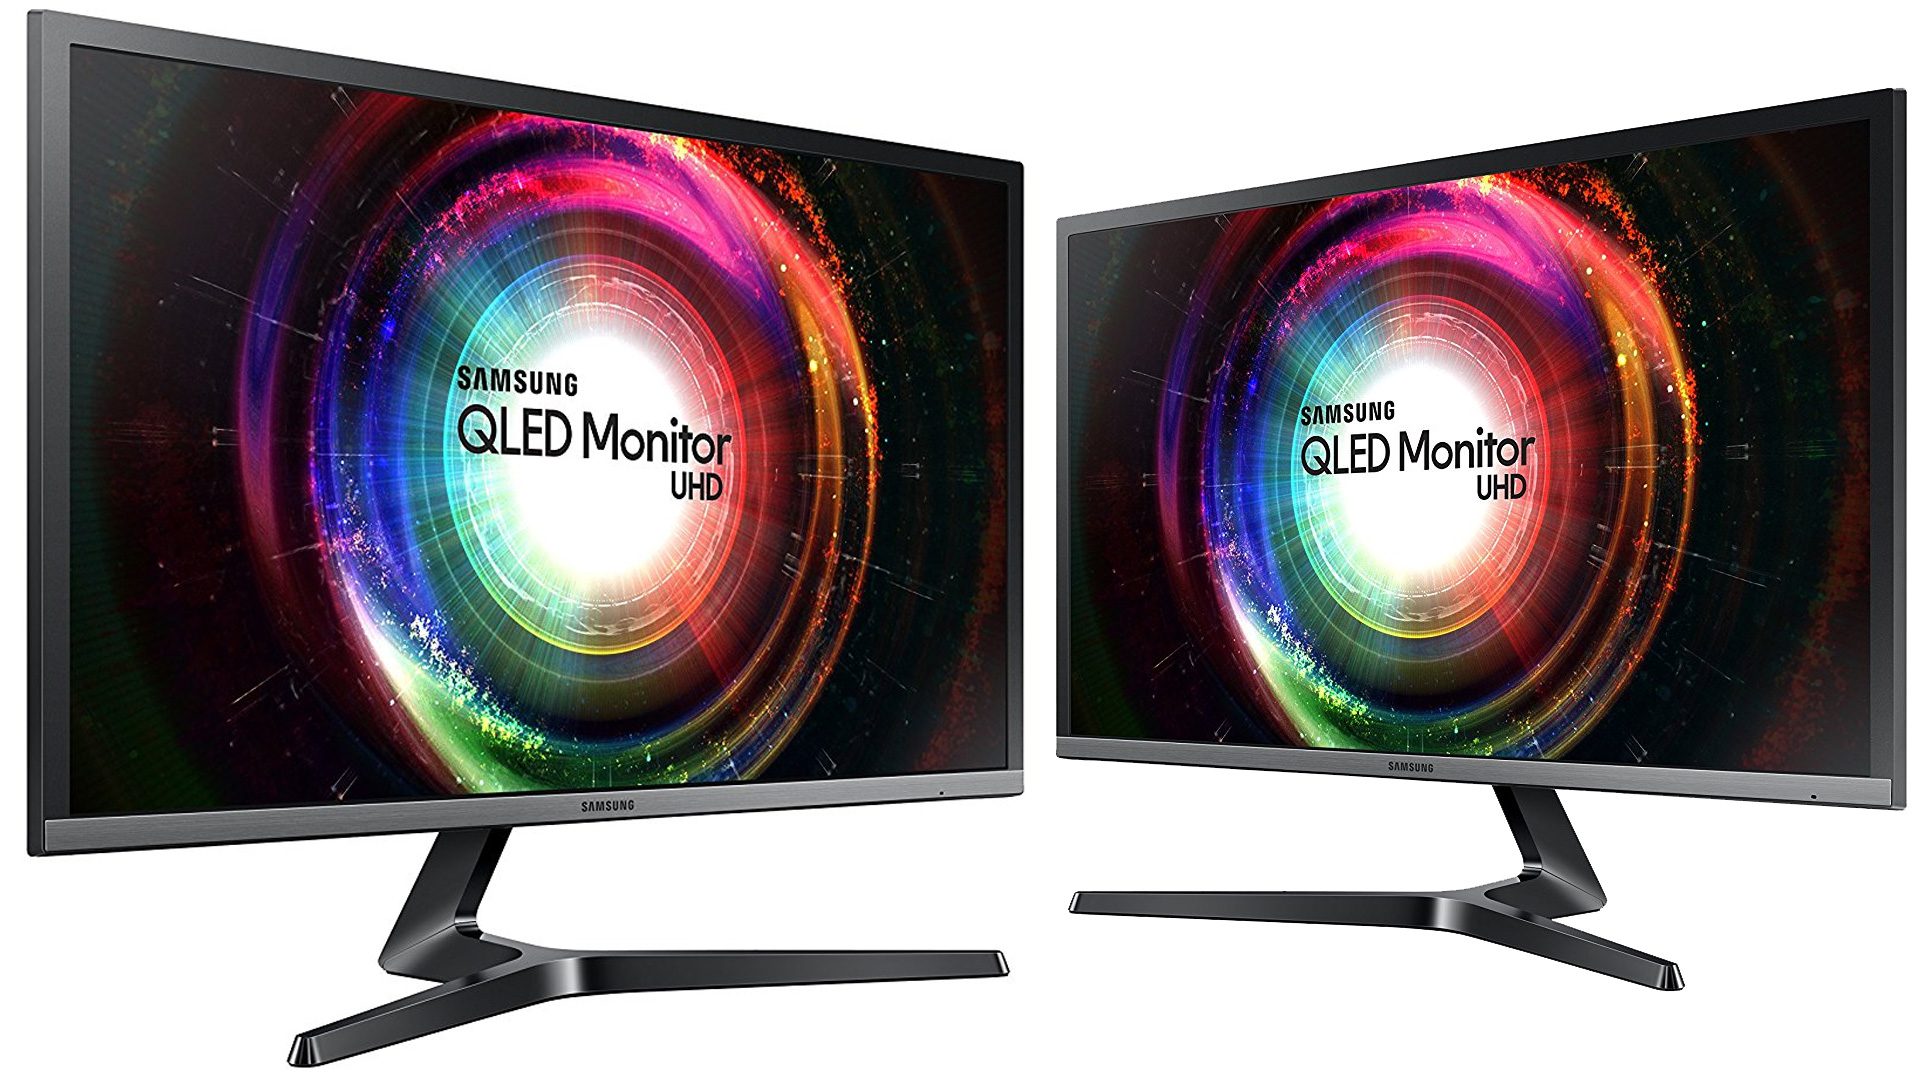 https://9to5google.com/wp-content/uploads/sites/4/2017/12/samsung-4k-28-inch-qled-monitor.jpg?quality=82&strip=all